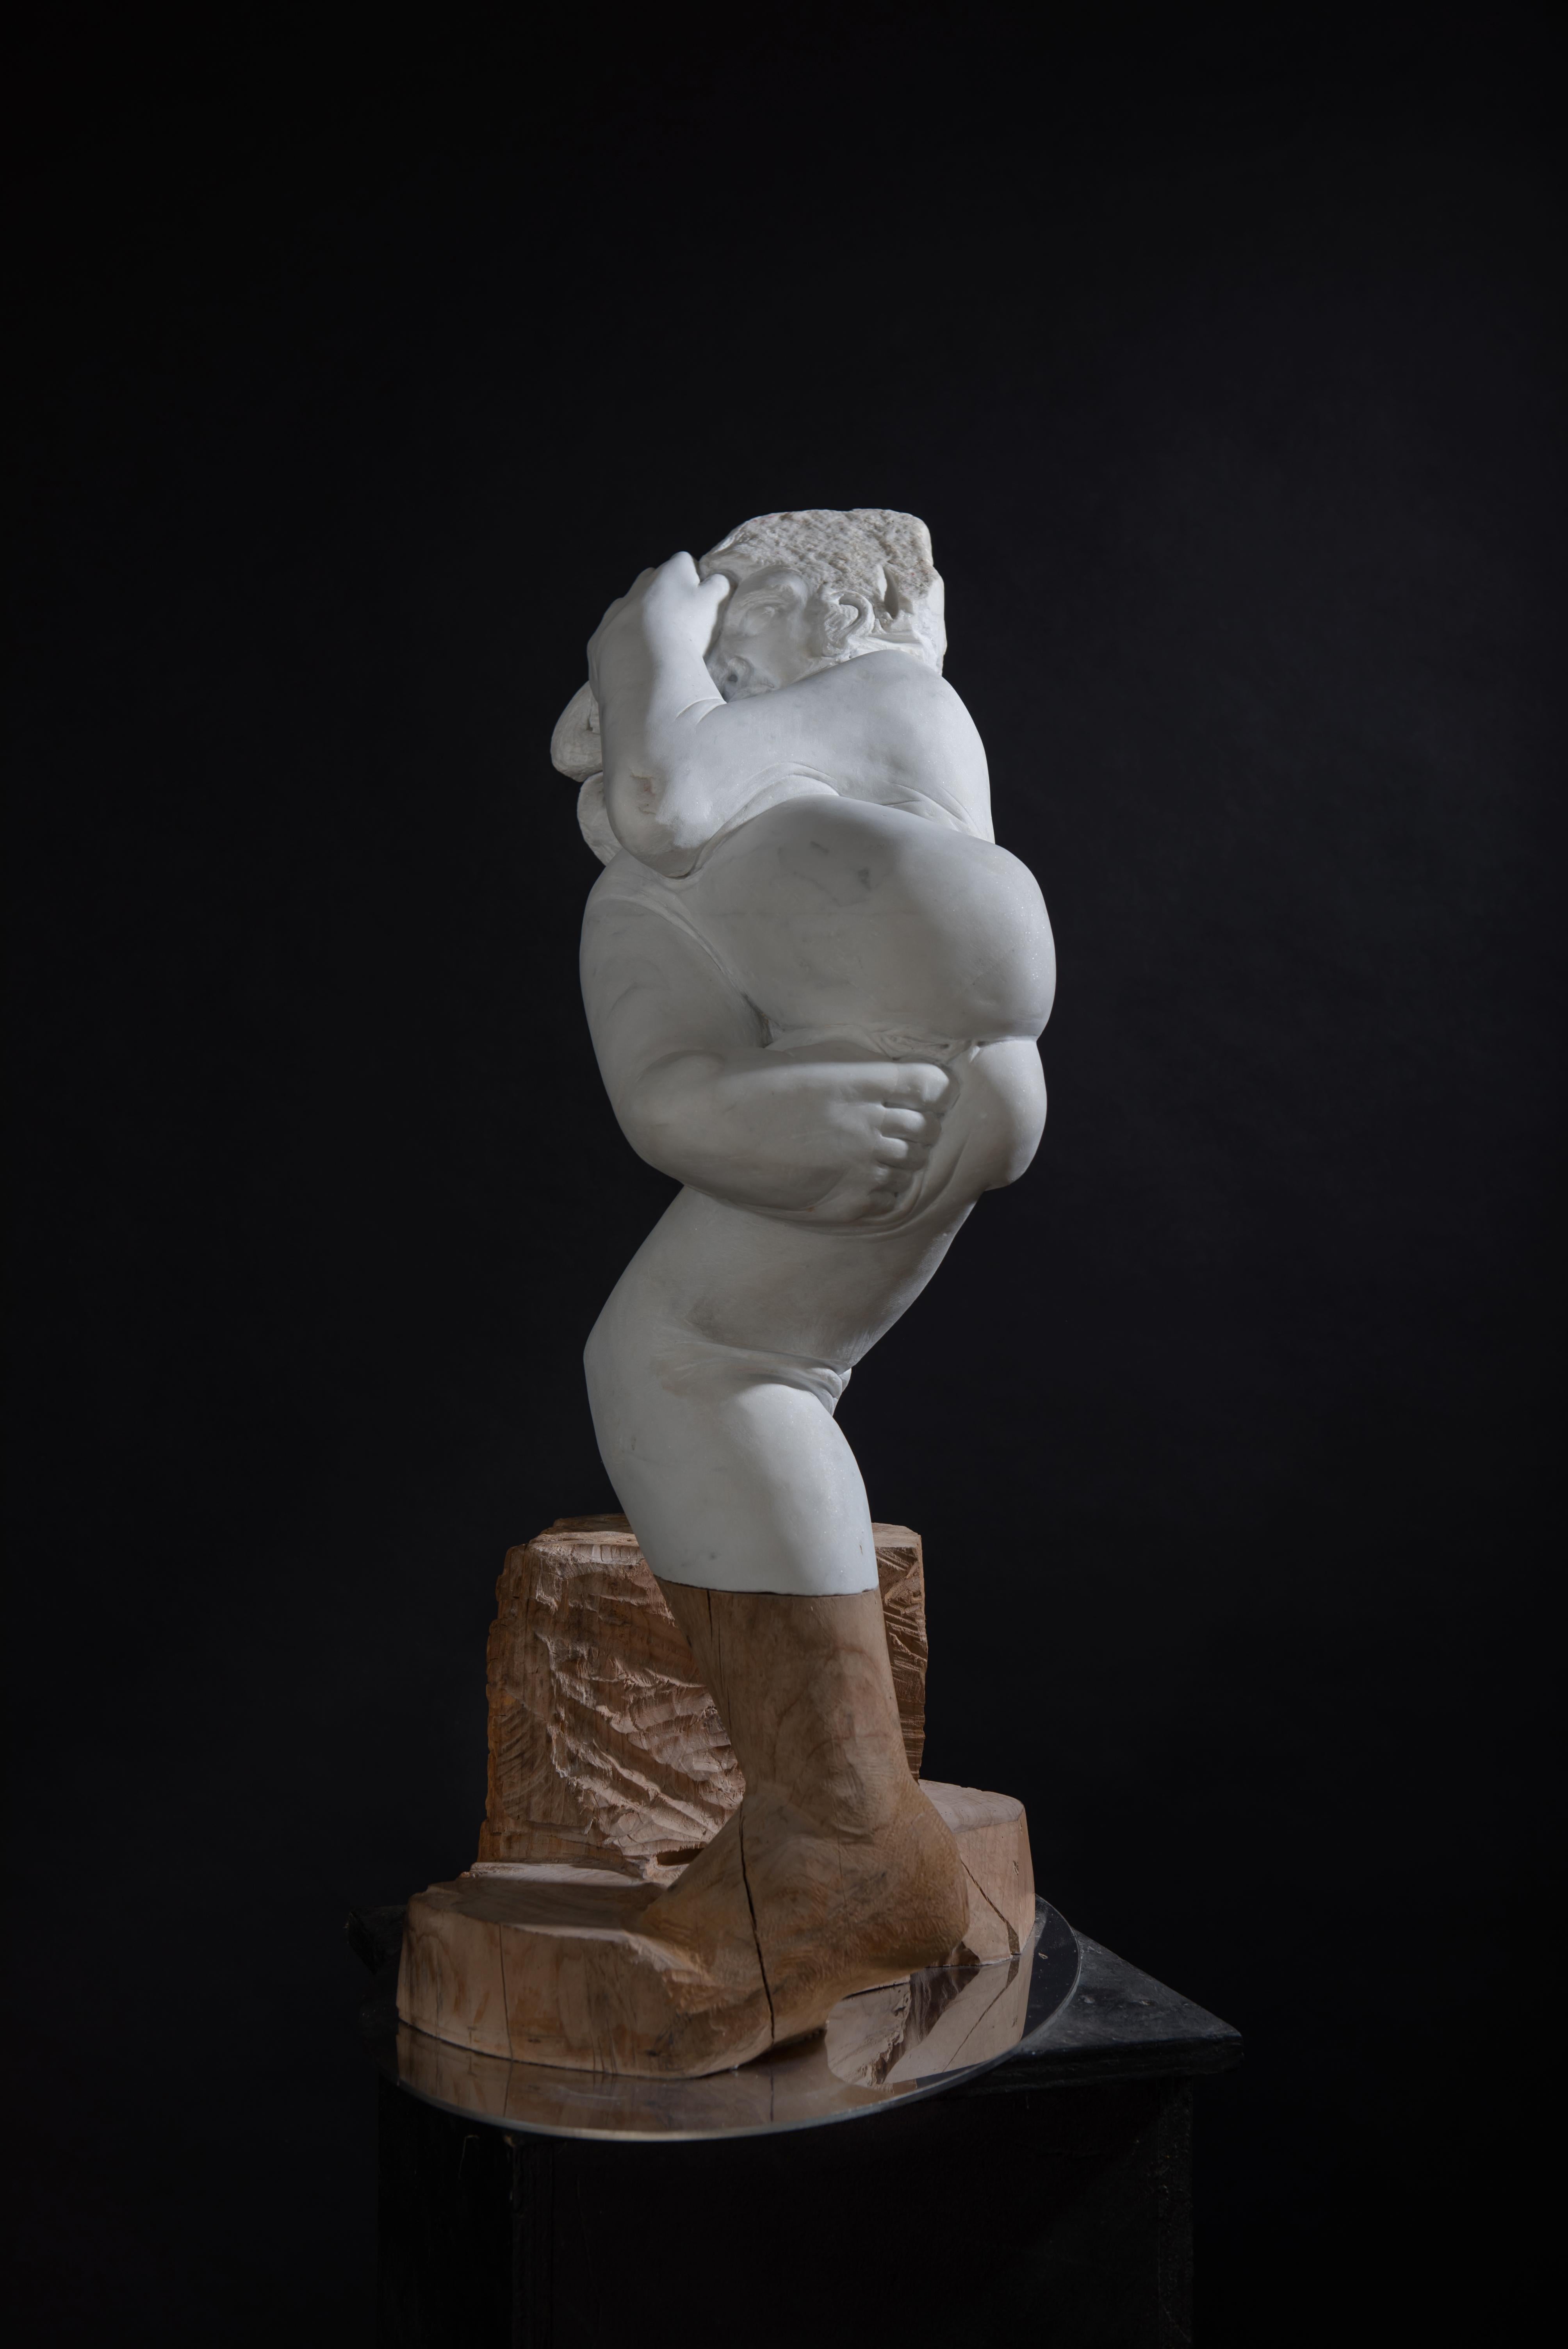 Donna by Lorenzo Vignoli 
hand carved marble + oak wood sculpture by contemporary Italian sculptor Lorenzo Vignoli  

Sculpture dimensions: 
30in W x 9 inch H x 19in D
75cm W x 23cm H x 49cm D
165lb / 75kg

Lorenzo Vignoli studied Painting at